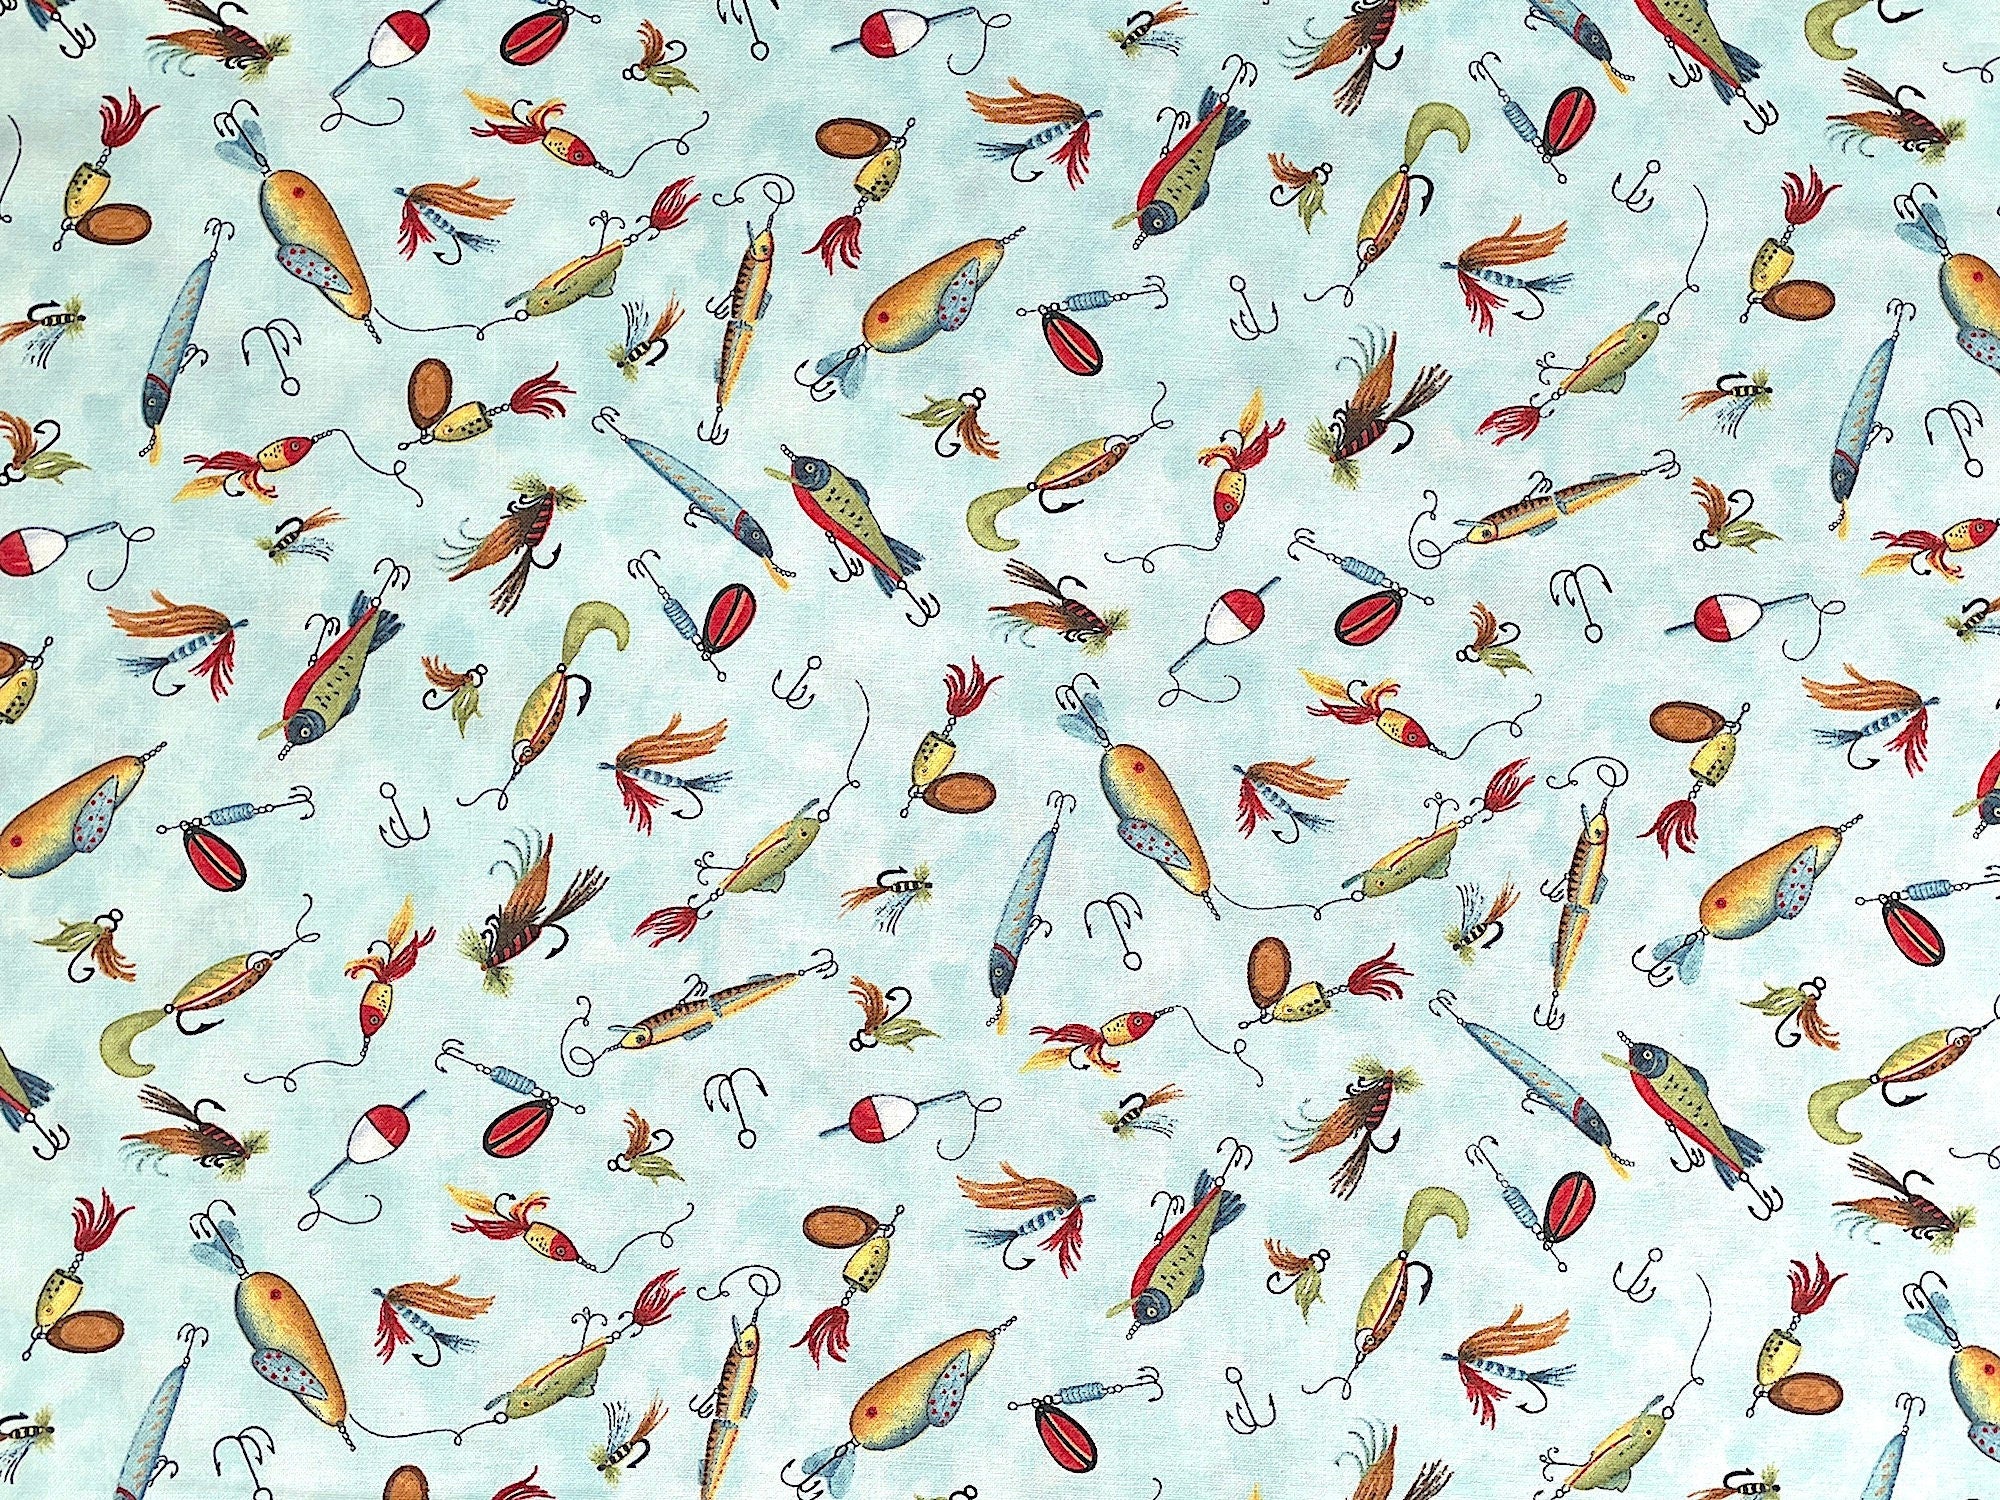 This blue fabric is covered with green, yellow, blue, black, white and red fishing lures. This fabric is part of the Down by the Lake collection by Wilmington Prints.